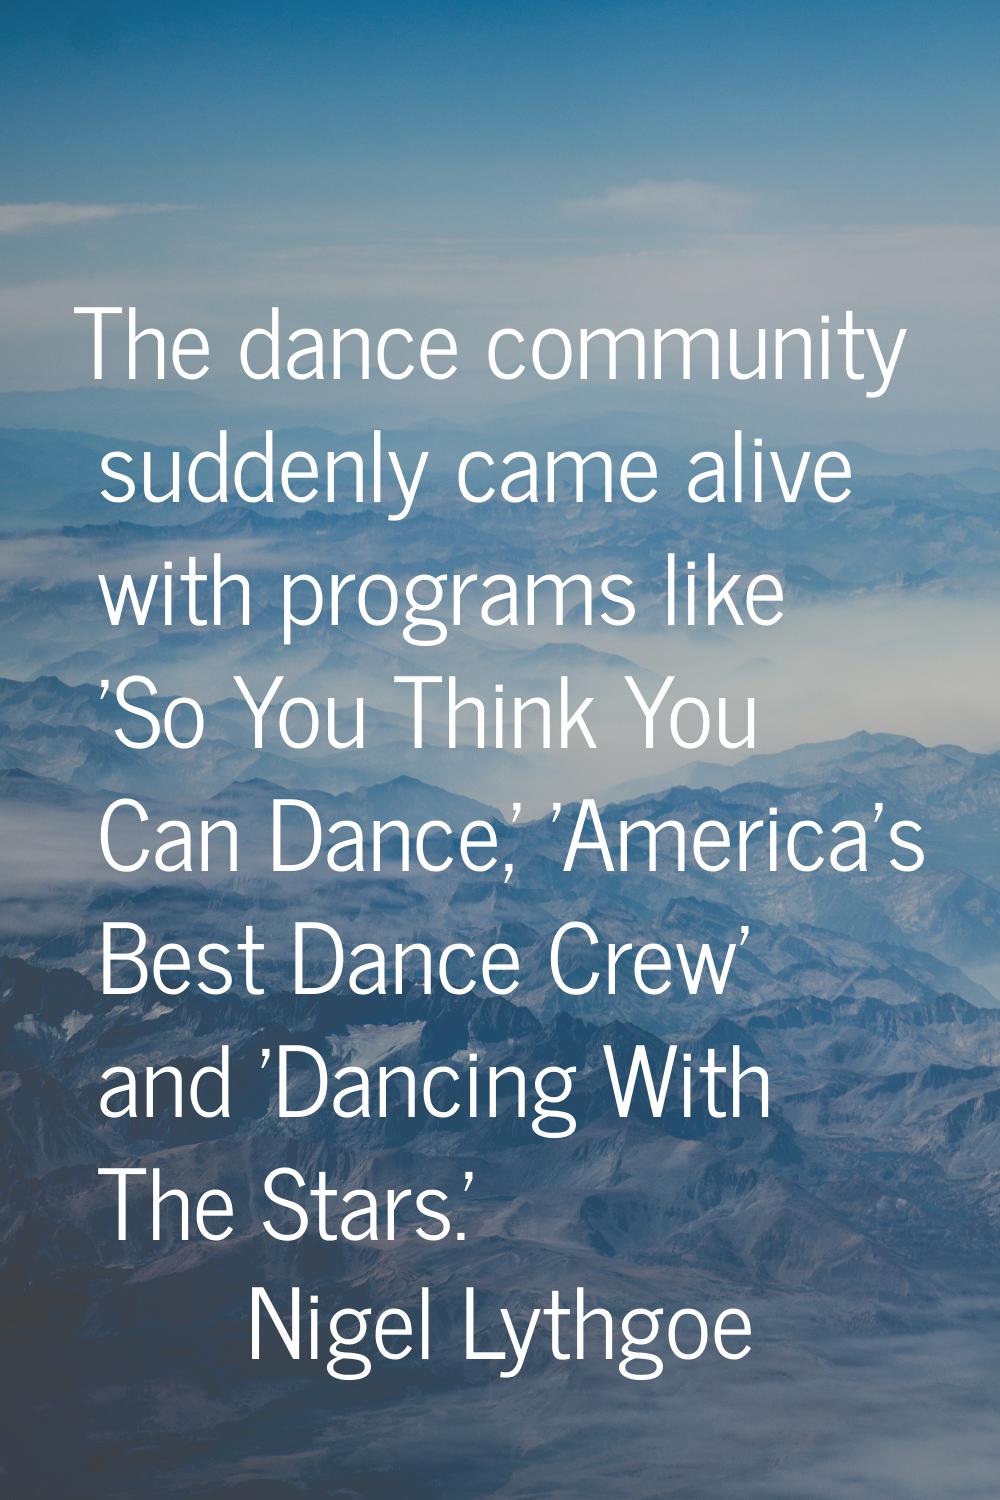 The dance community suddenly came alive with programs like 'So You Think You Can Dance,' 'America's